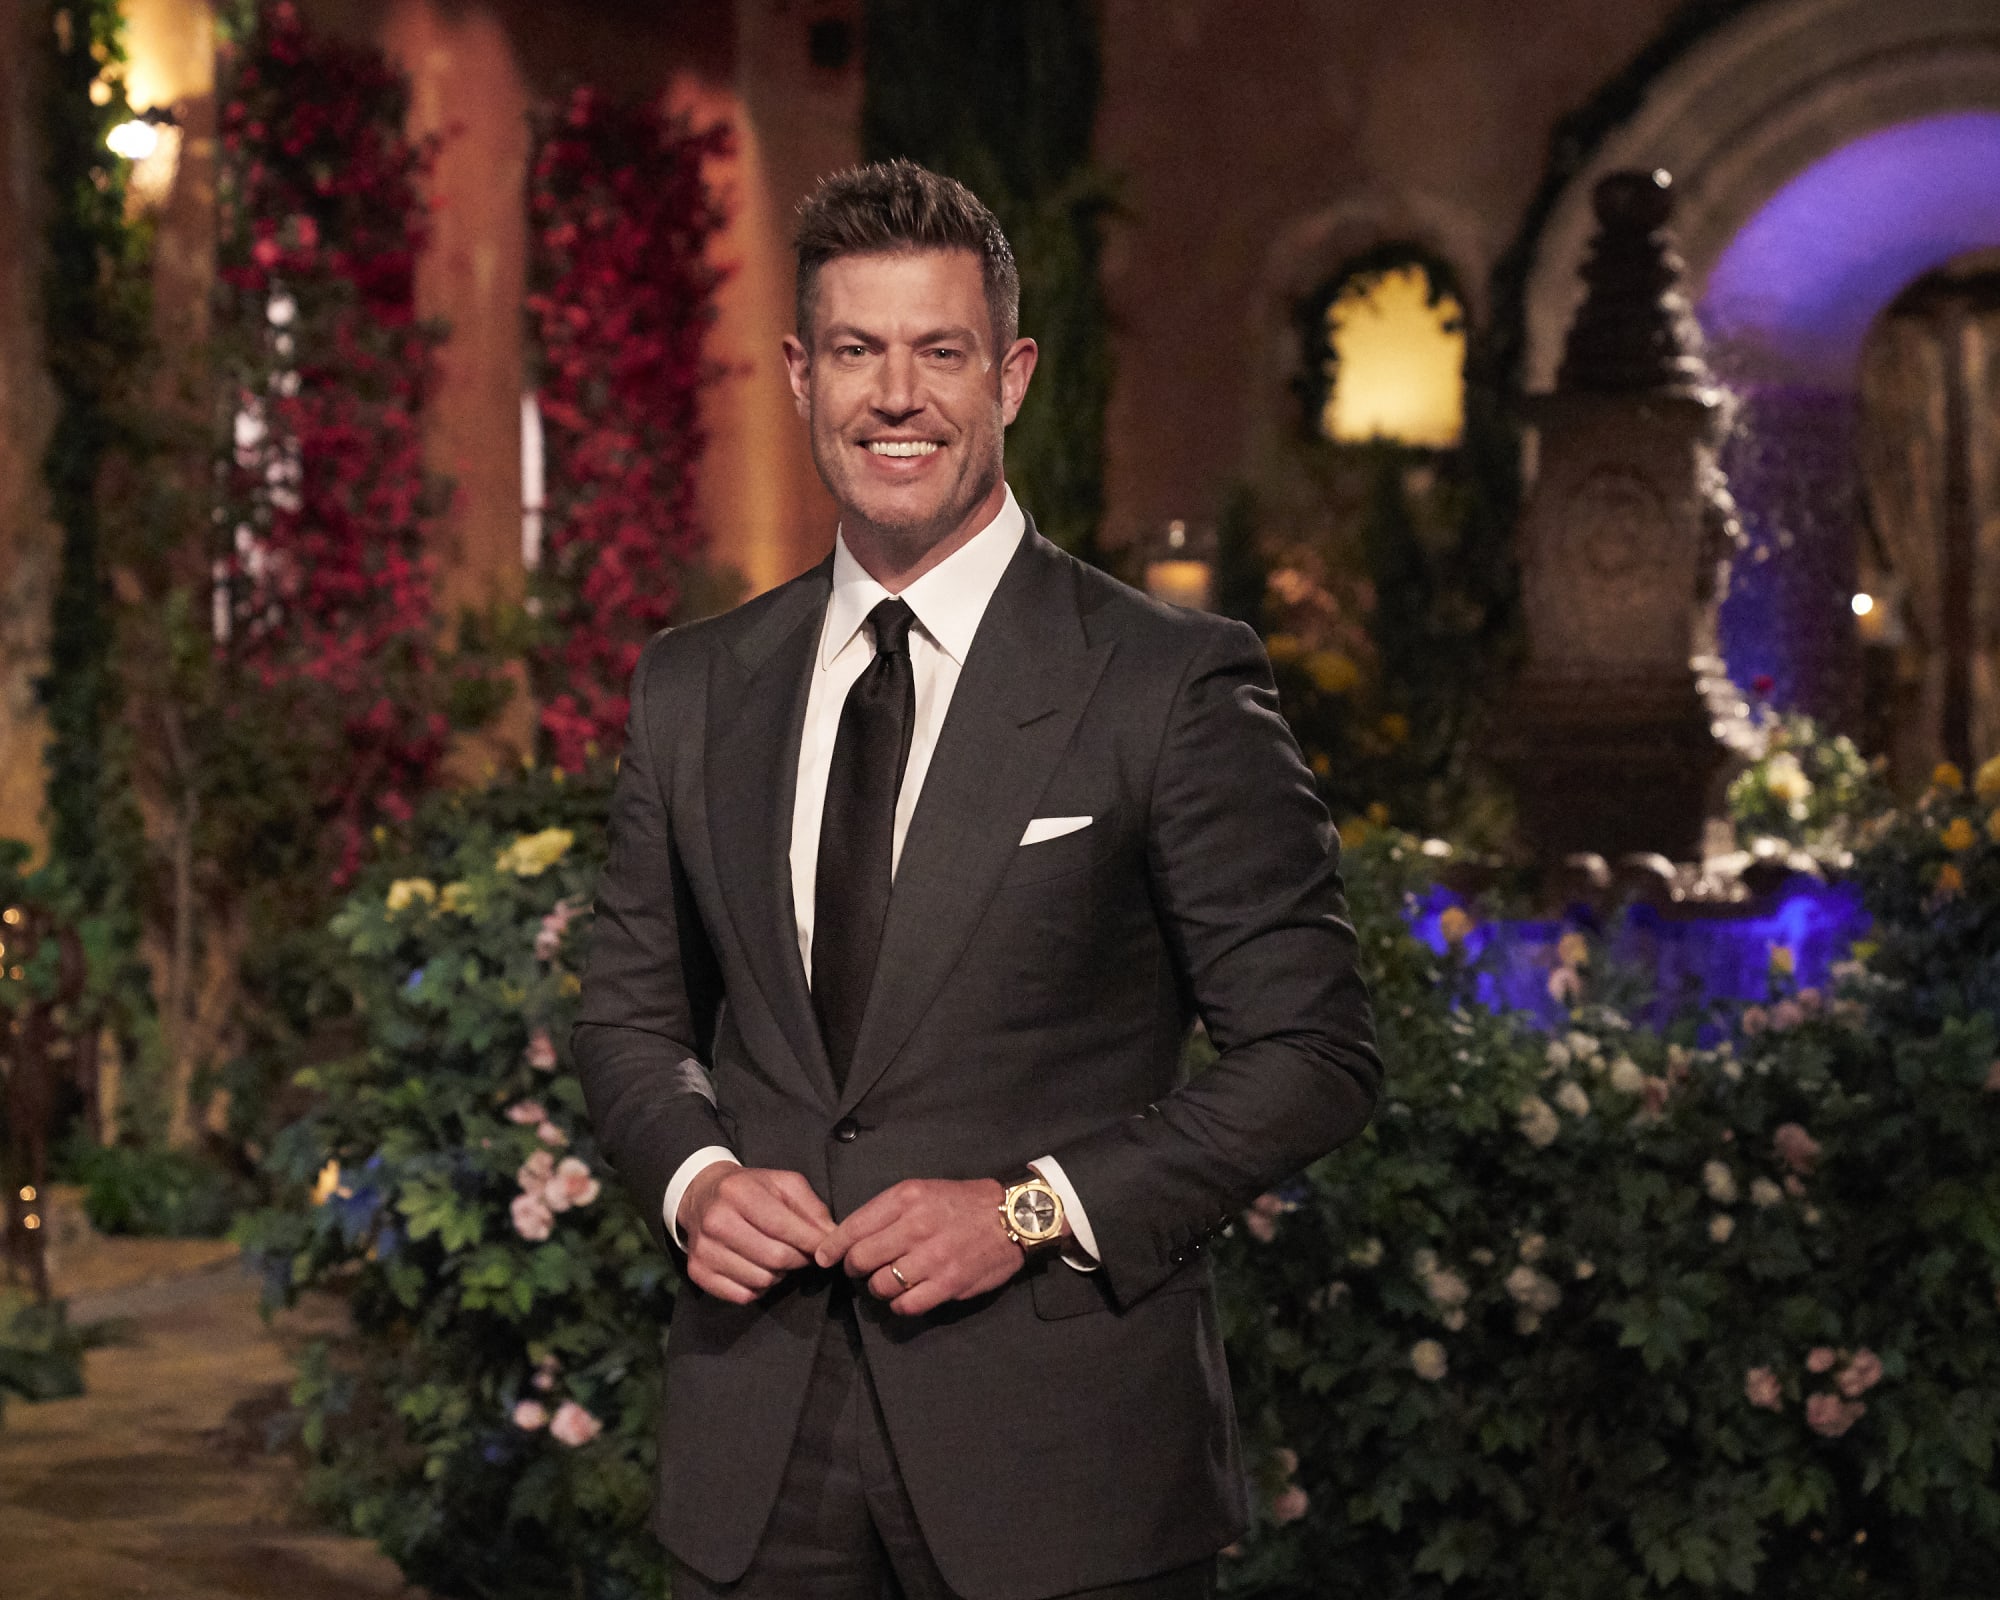 Why did Jesse Palmer and Jessica Bowlin break up?